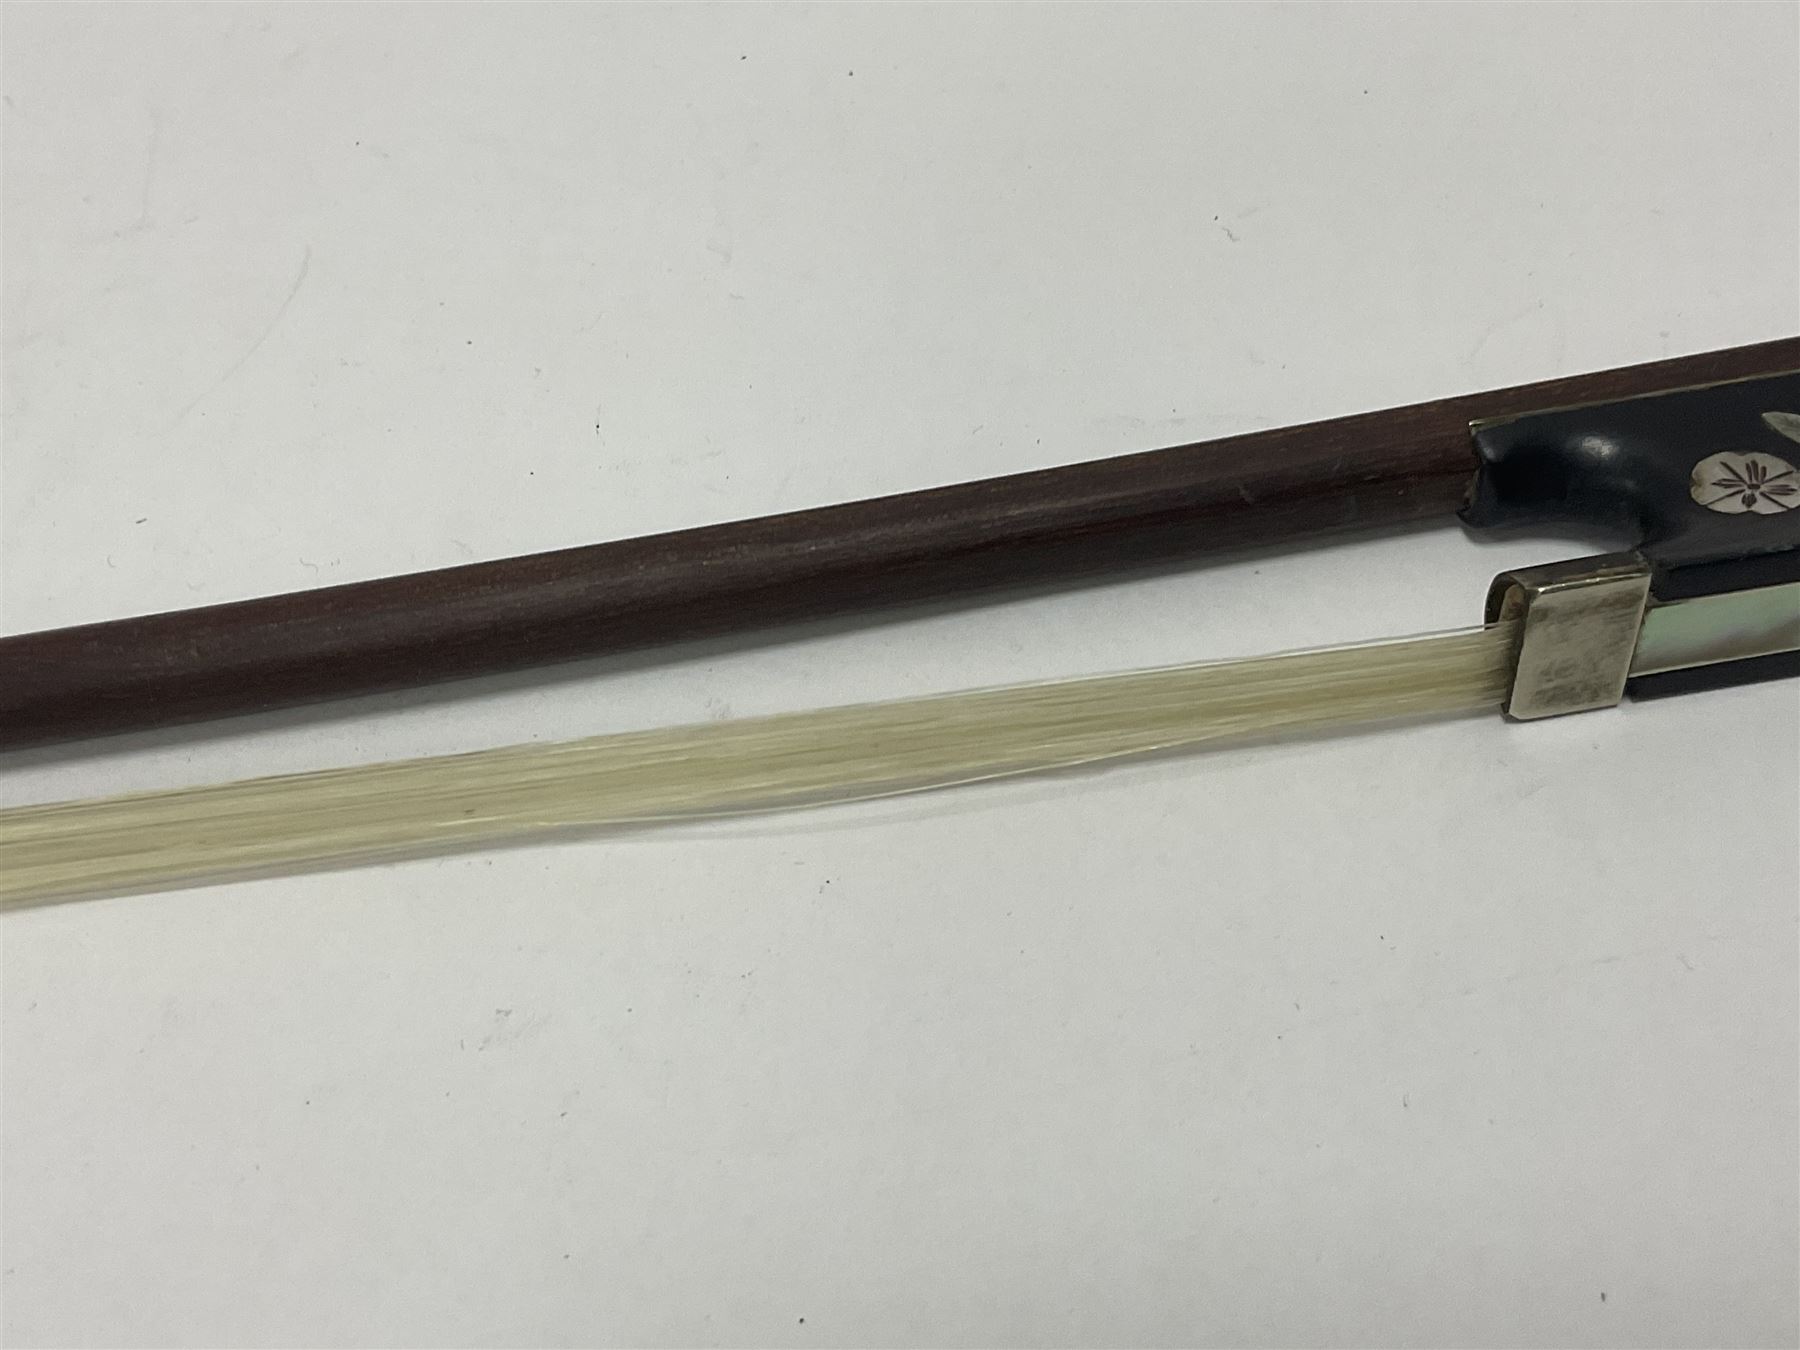 19th century wooden violin bow with a decorative mother of pearl inlay depicting flowers to the frog - Image 9 of 13